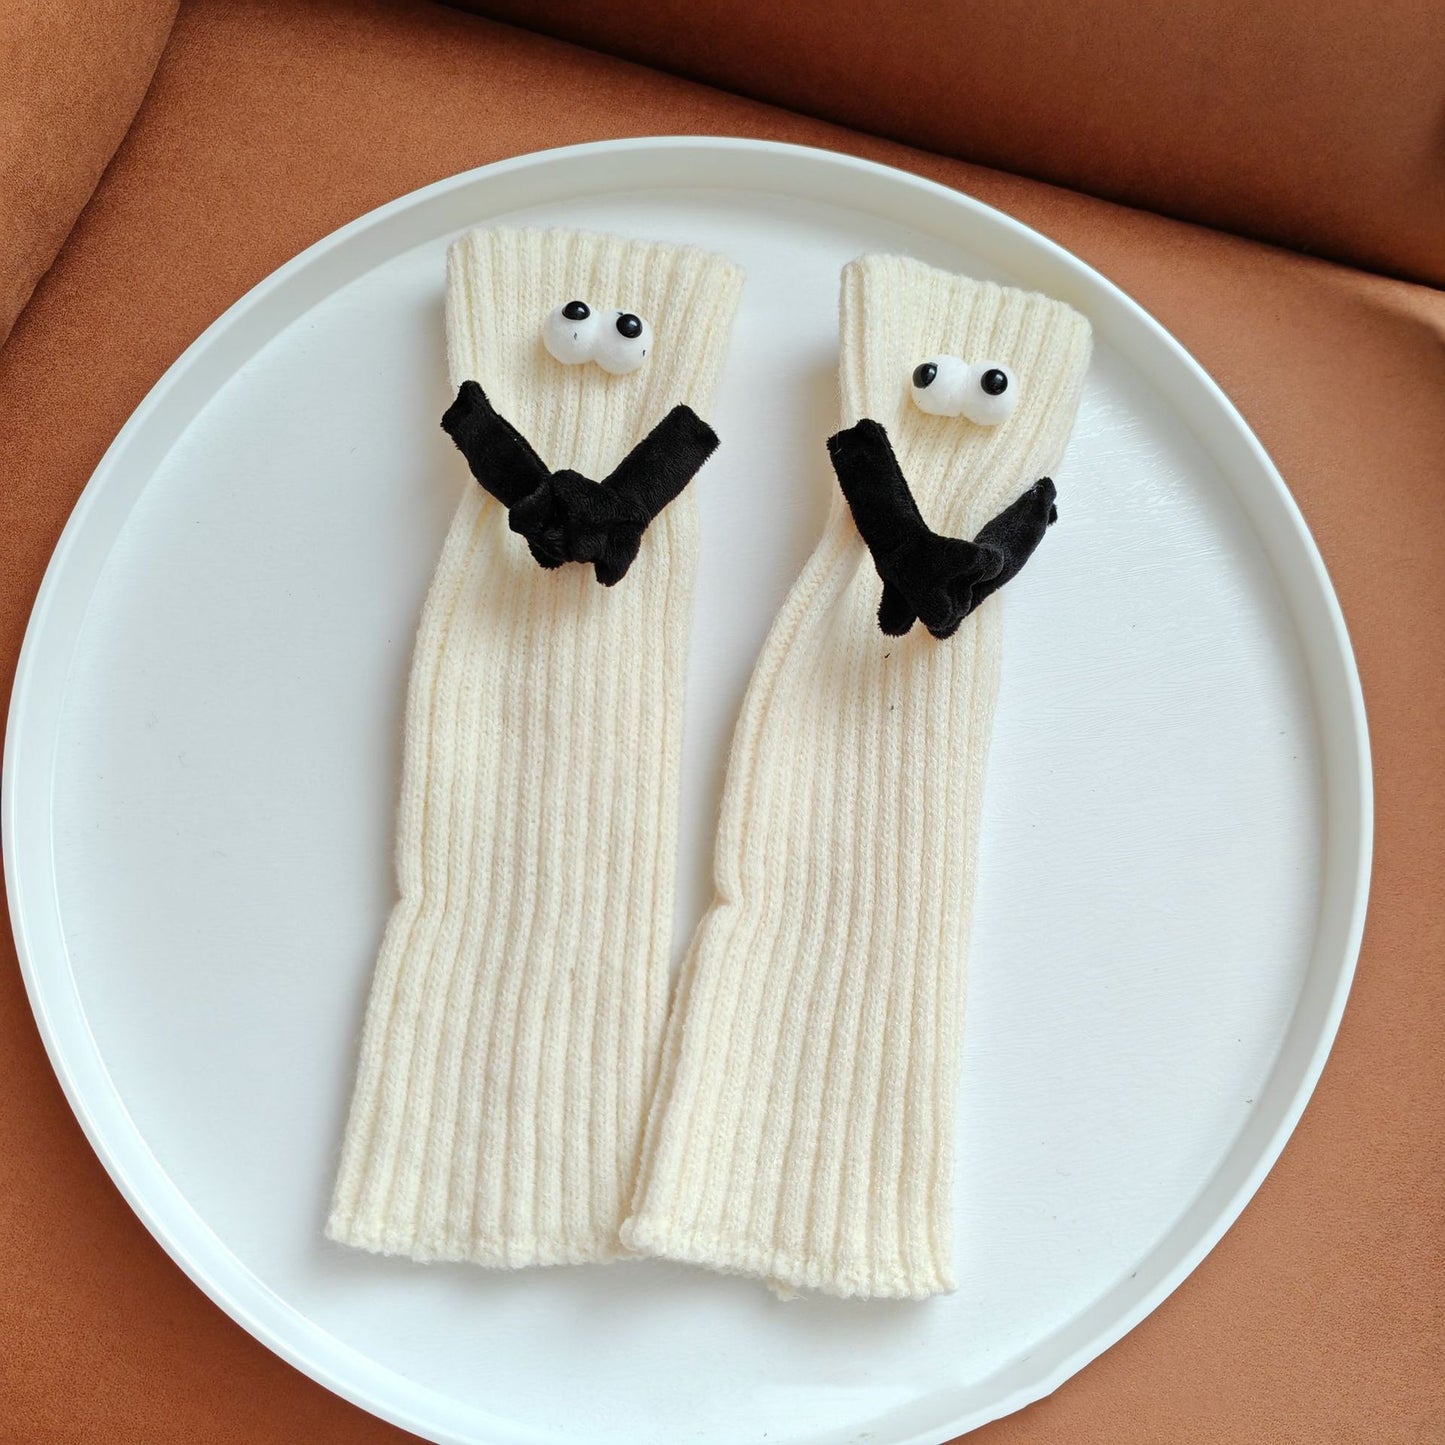 Couples' Abstract-Designed Magnetic Grip Mid-Calf Socks